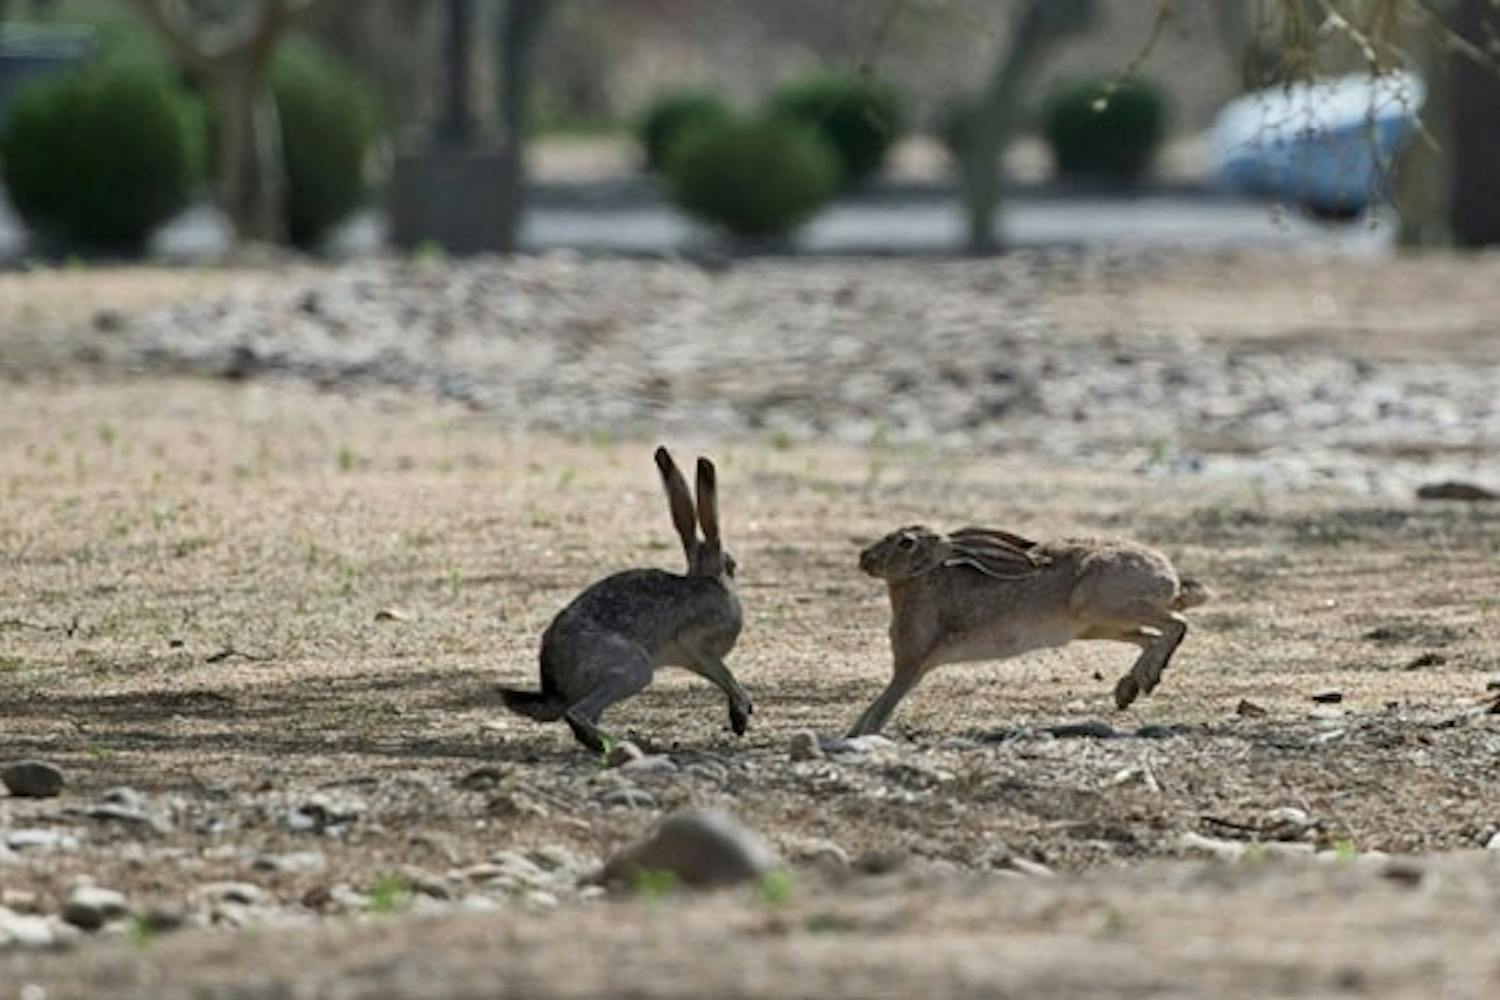 FROLICKING: Arizona blacktail jackrabbits were a common sight on the West campus during the warm afternoon. (Photo by Michael Arellano)